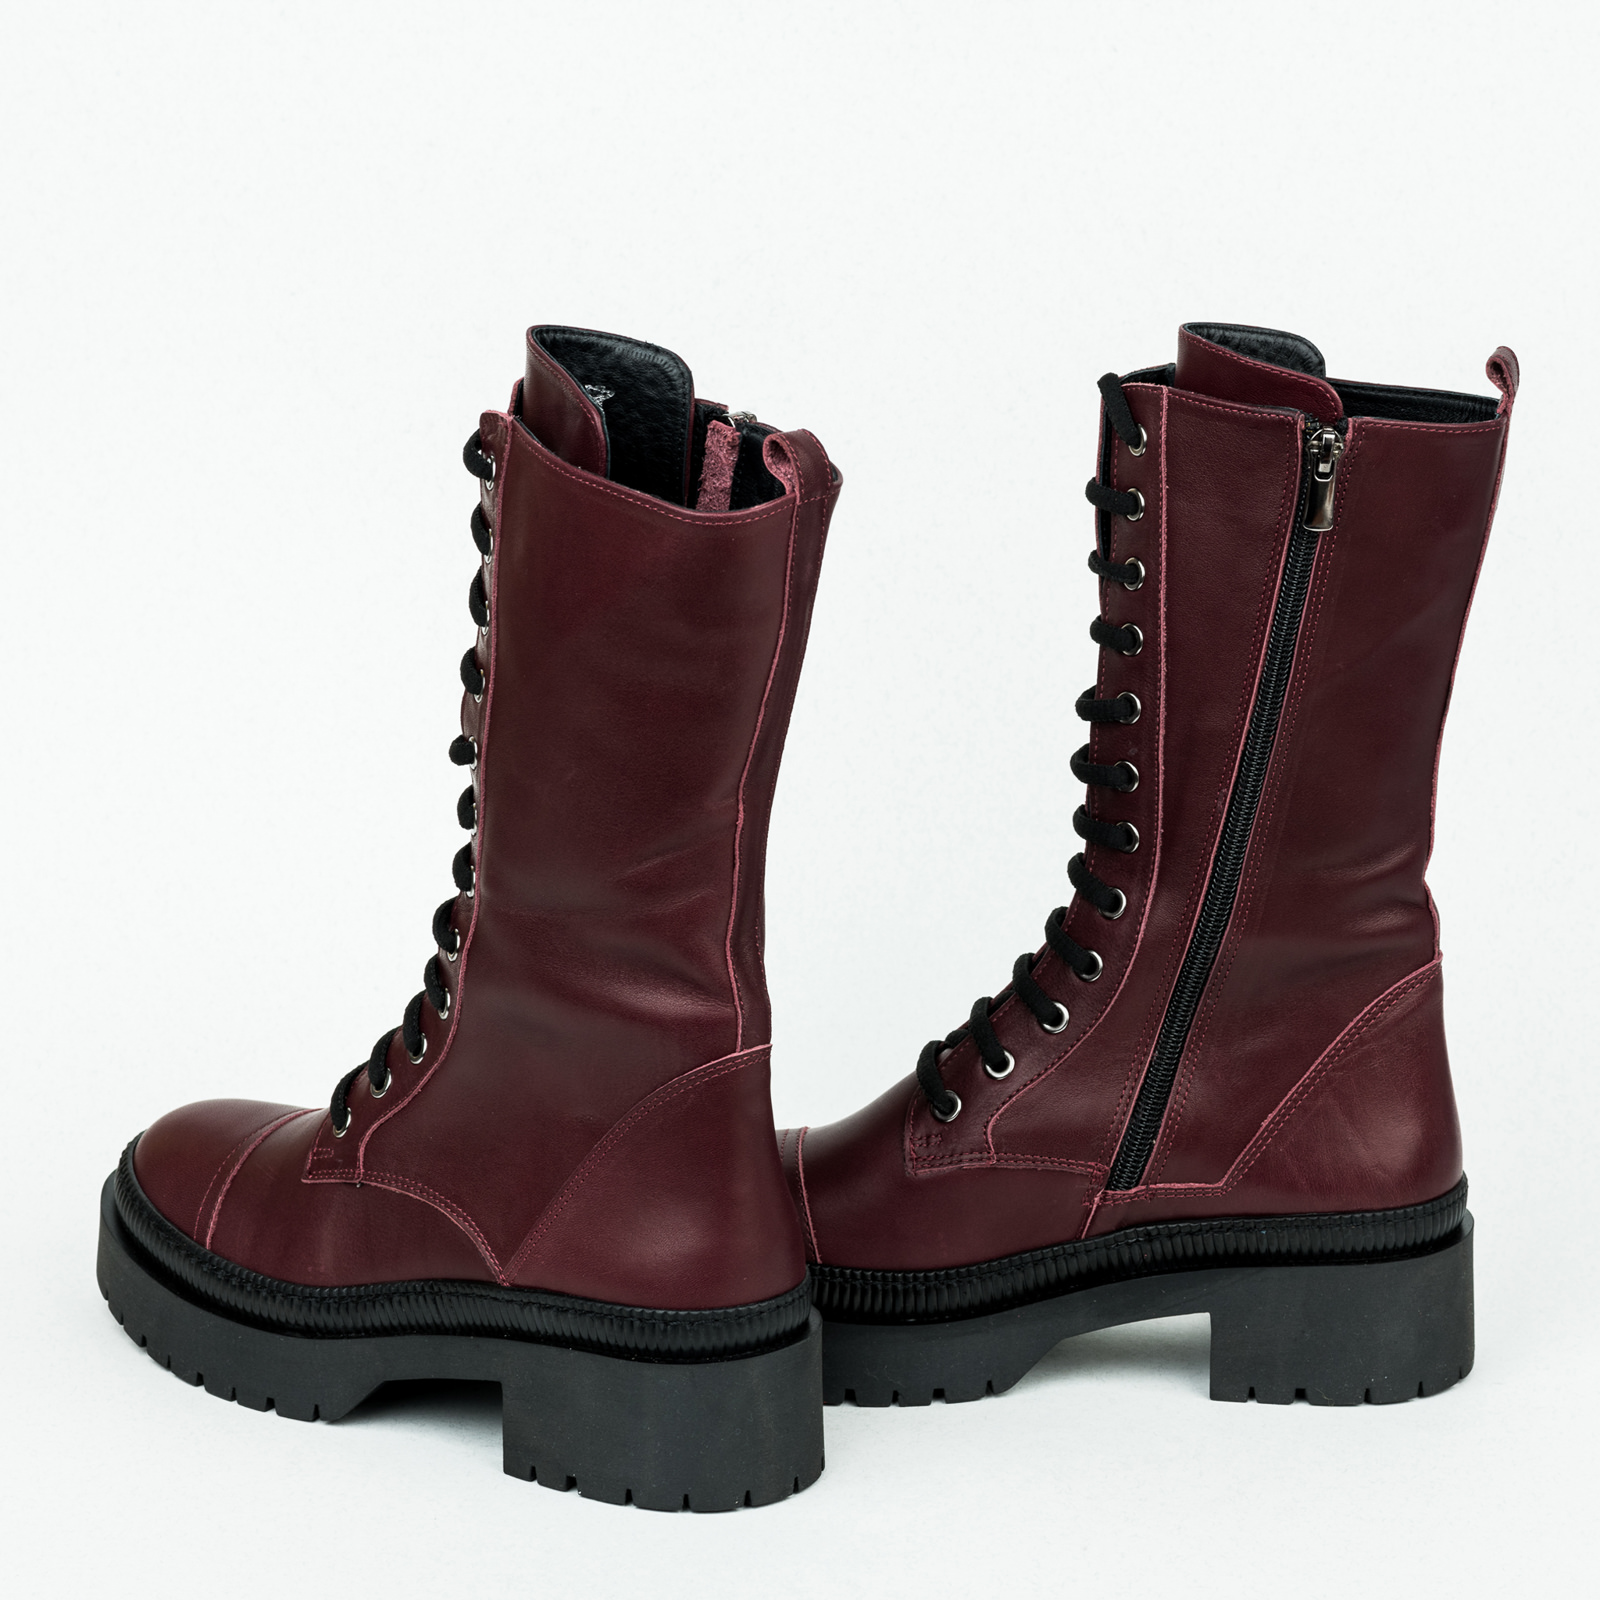 Leather ankle boots B150 - WINE RED